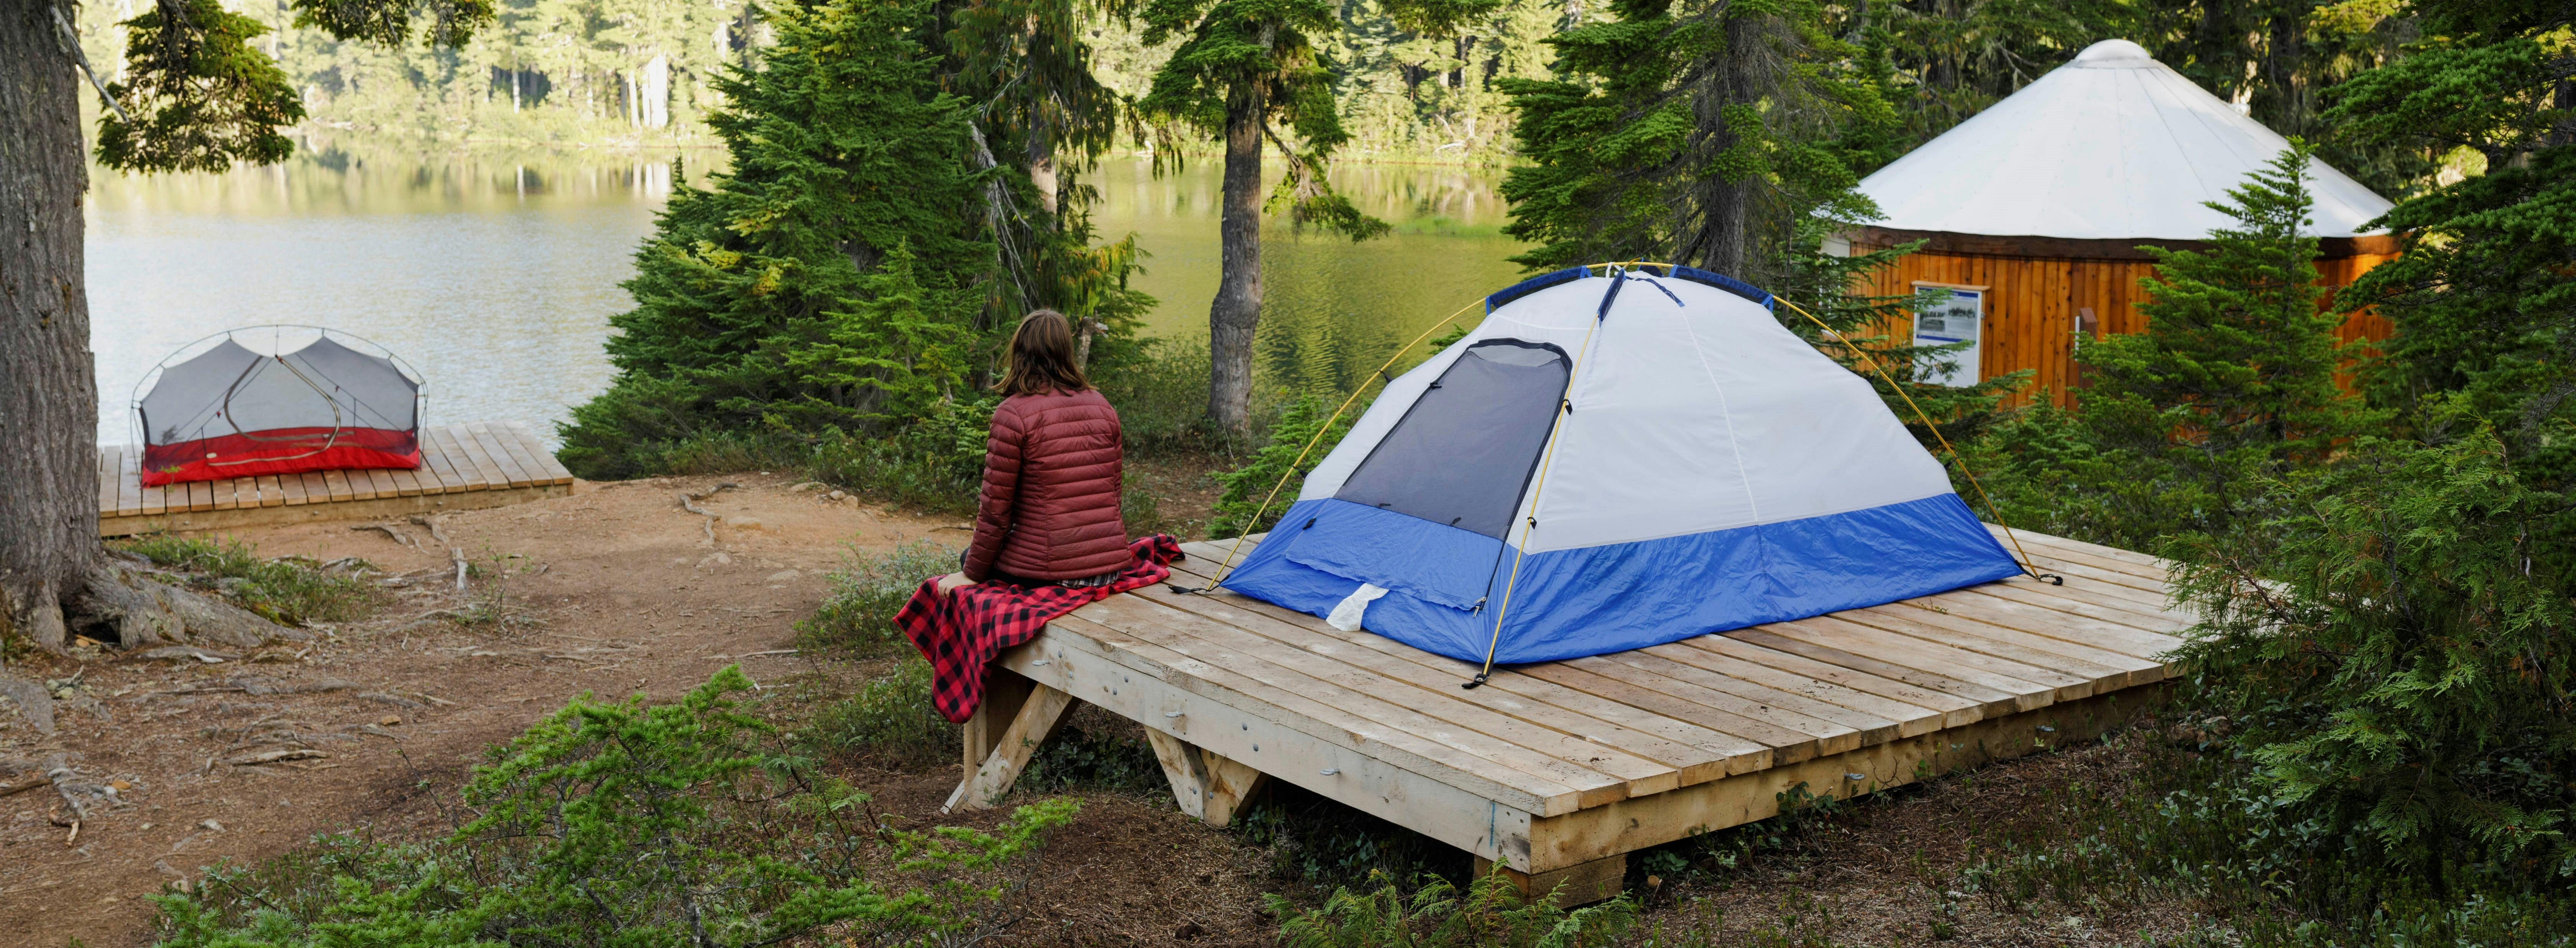 A person sits on the corner of a tent platform looking at a lake in the distance. (Croteau Lake, Strathcona Park)